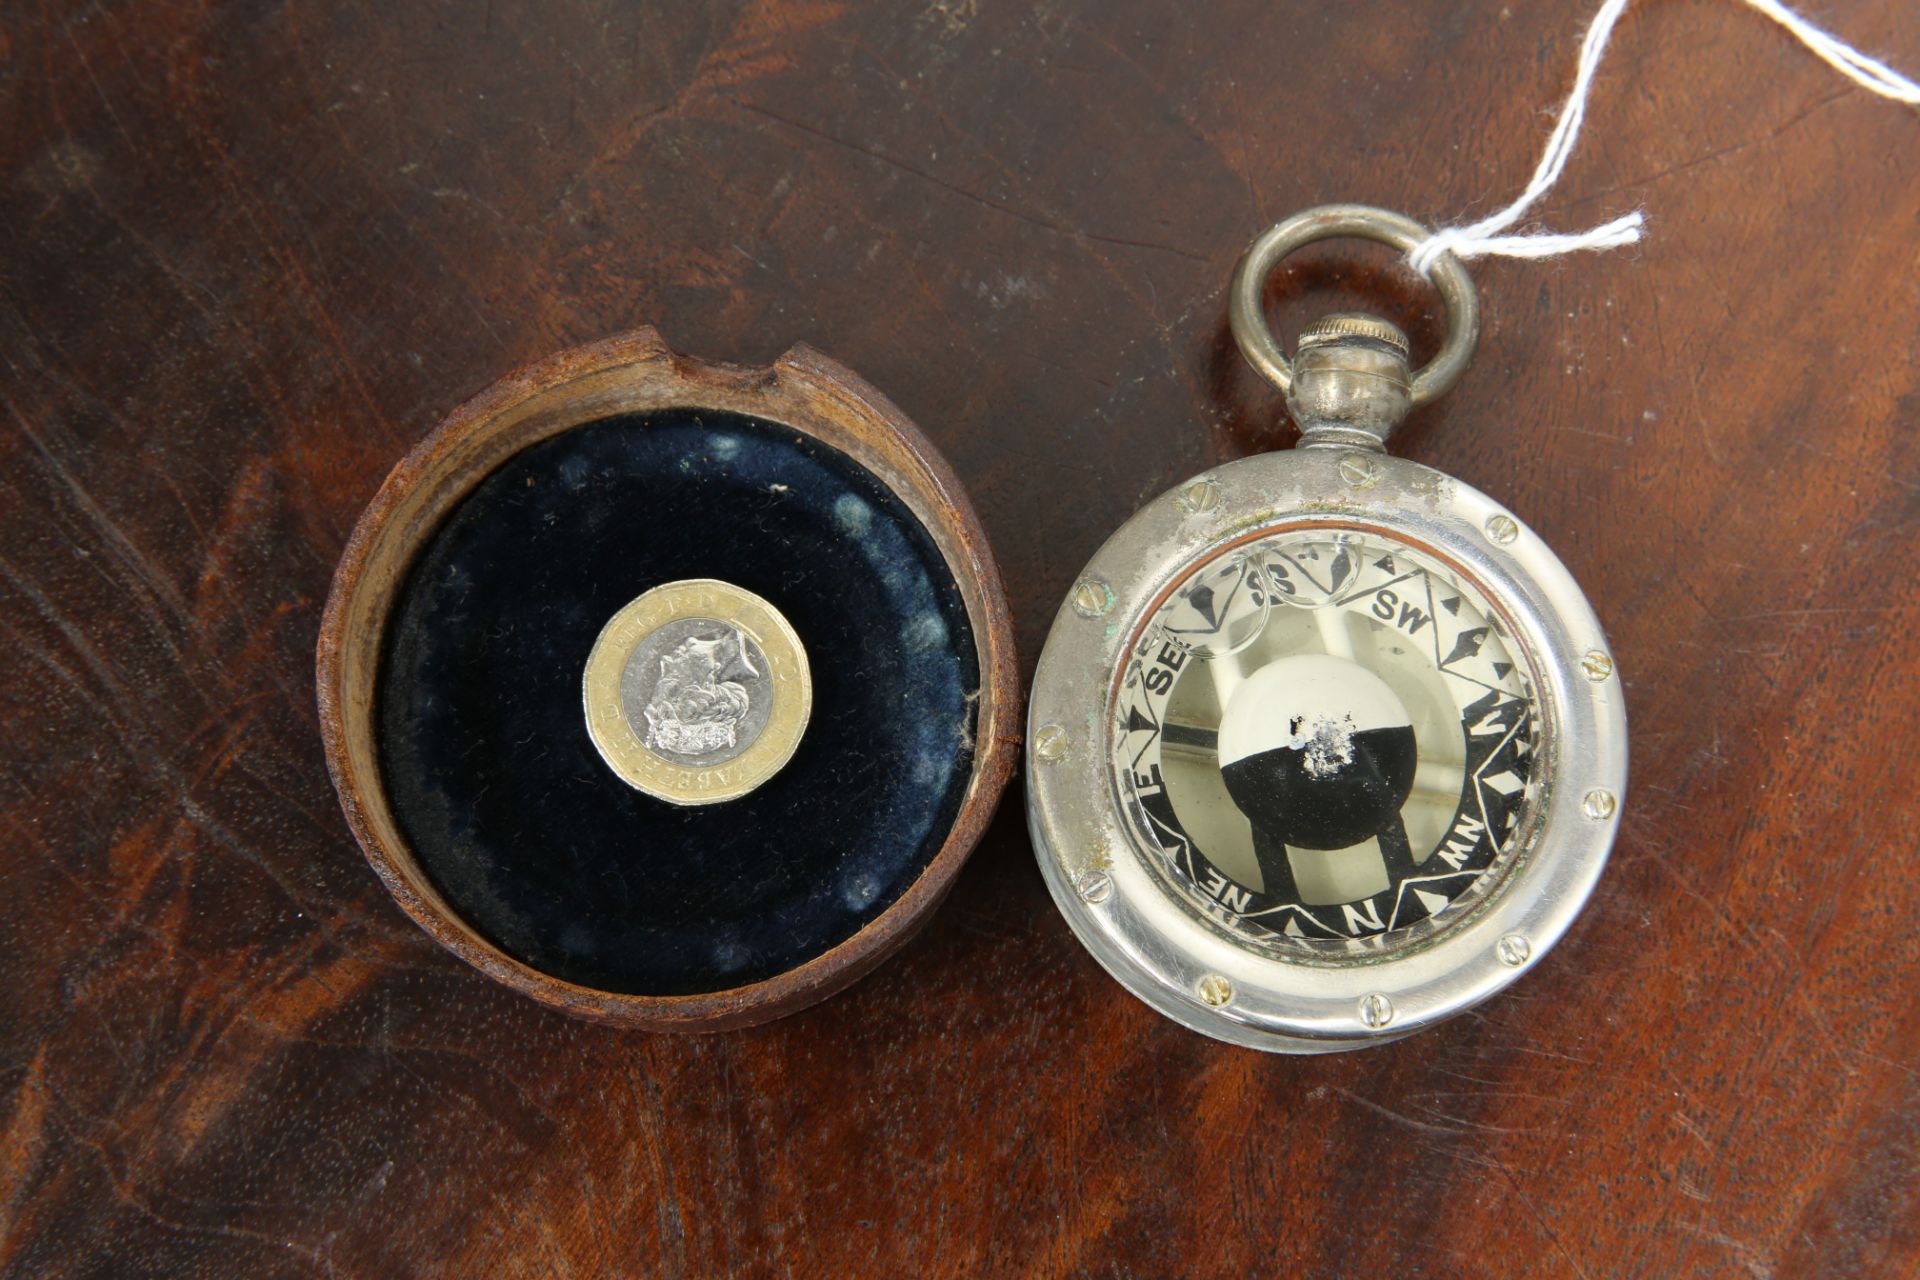 A STEEL CASED POCKET COMPASS, BY YEATES & SON, DUBLIN, in a leather case stamped 'DALKEY REGATTA - Image 4 of 4